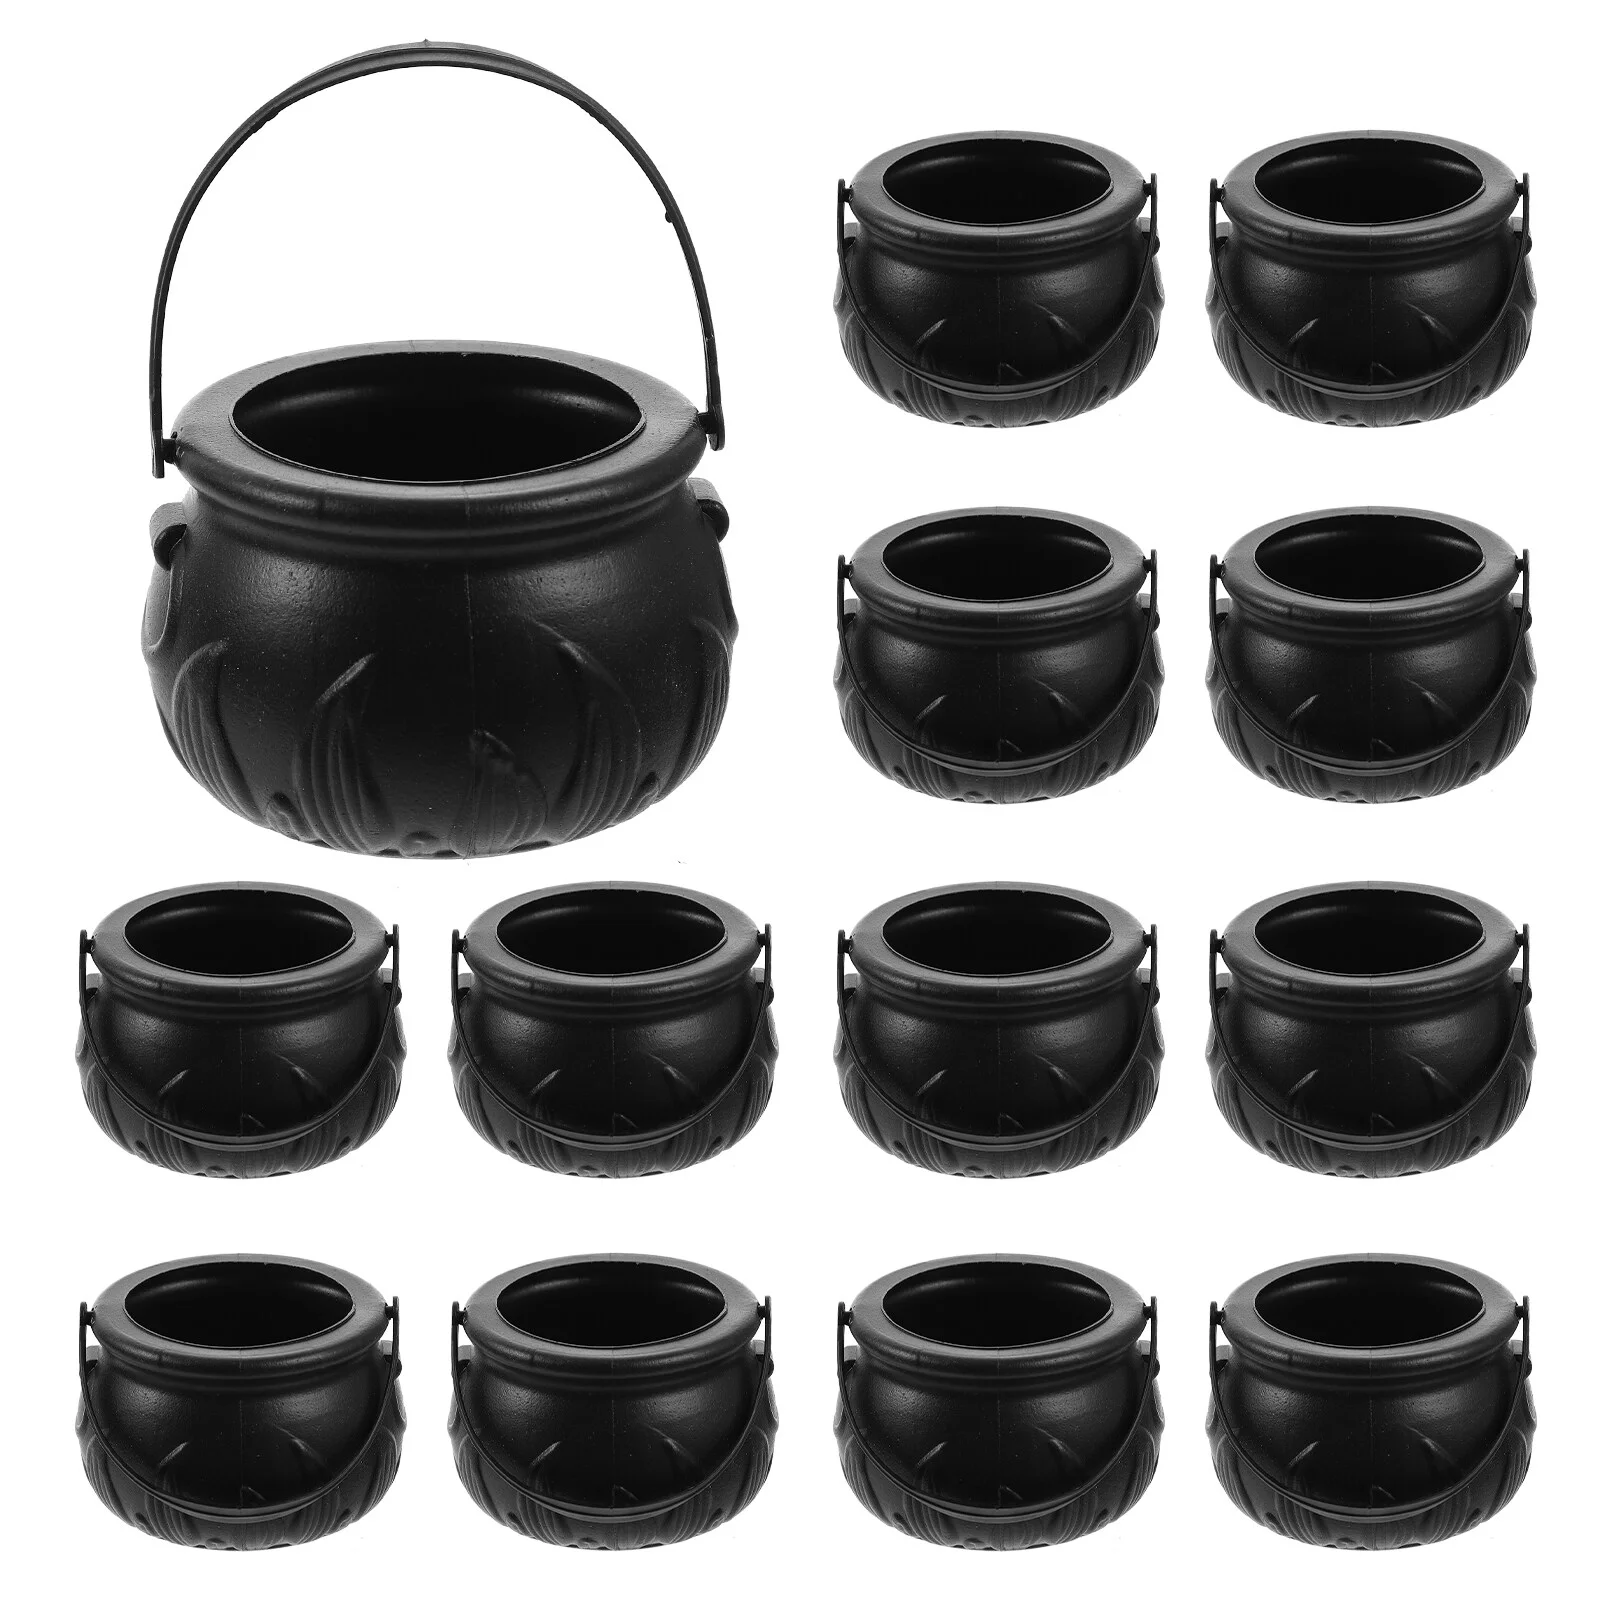 

12 Witch Bucket Candy Gift Jar Trick Or Treat Basket Pail Holder Container Nightclub Bar Scene Prop Party Gift Favors